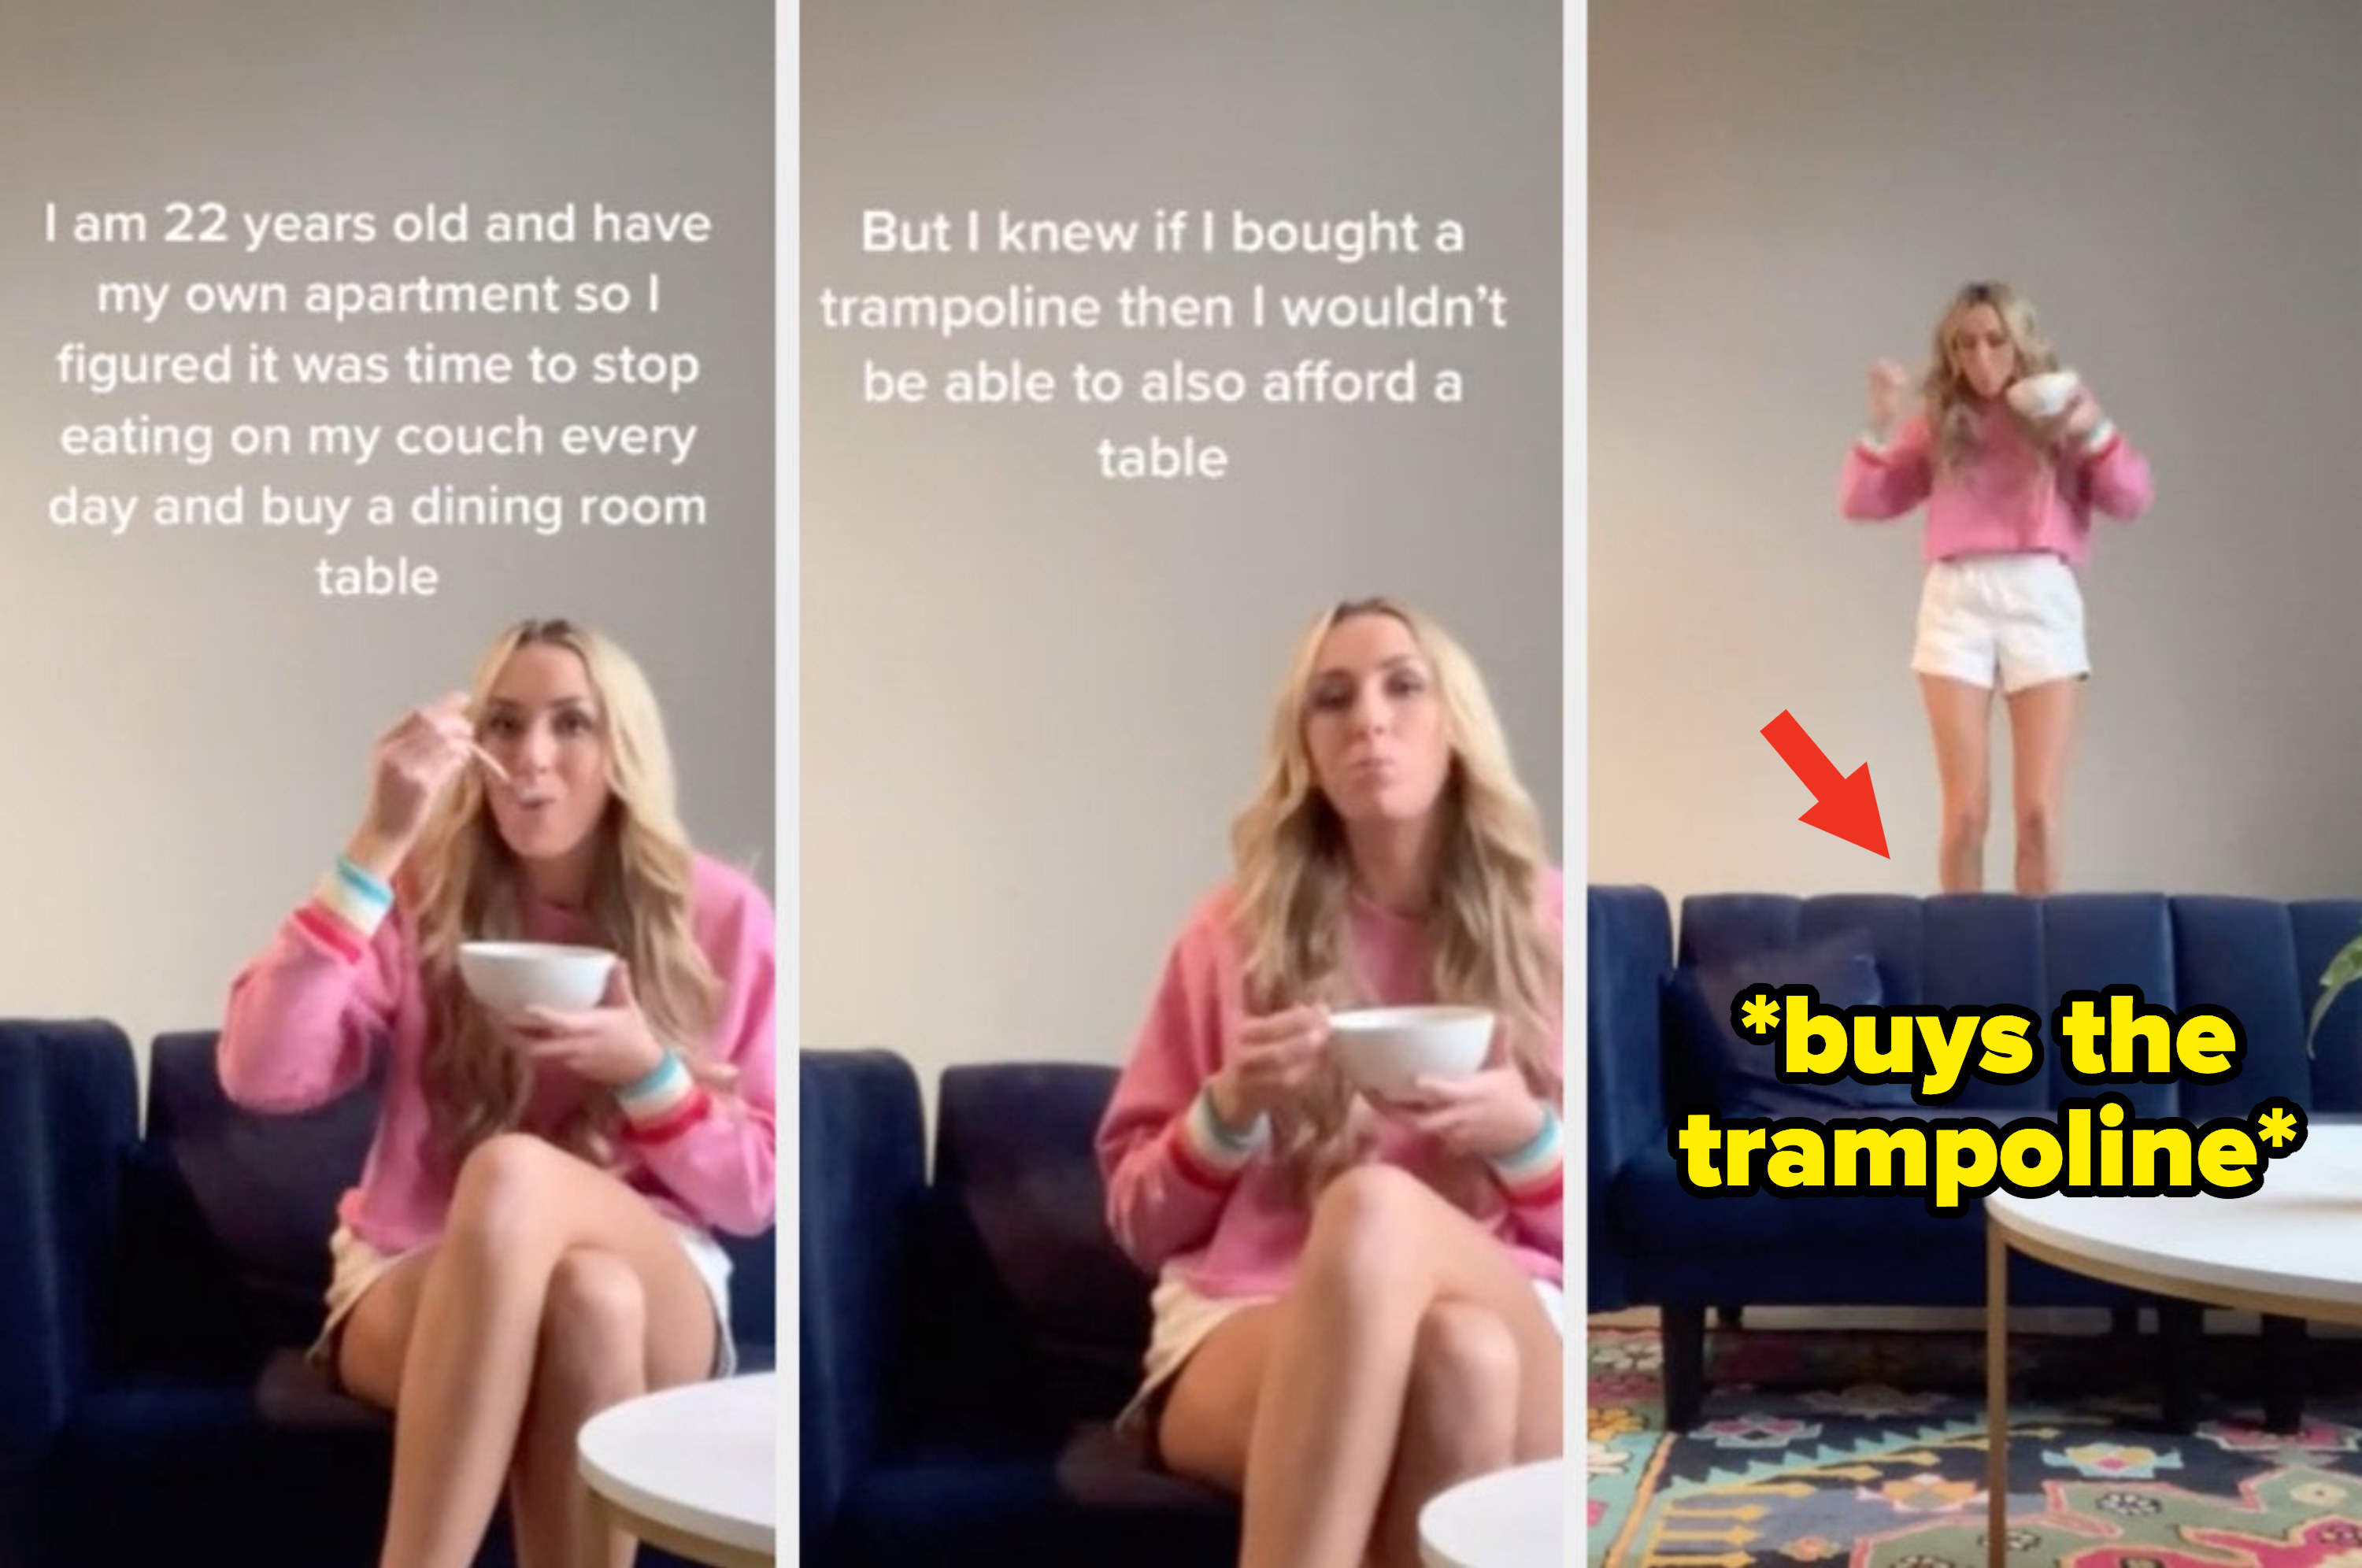 A 22-year-old sits on a couch, eating and thinking she needs a dining table, and then she jumps on a trampoline she bought instead